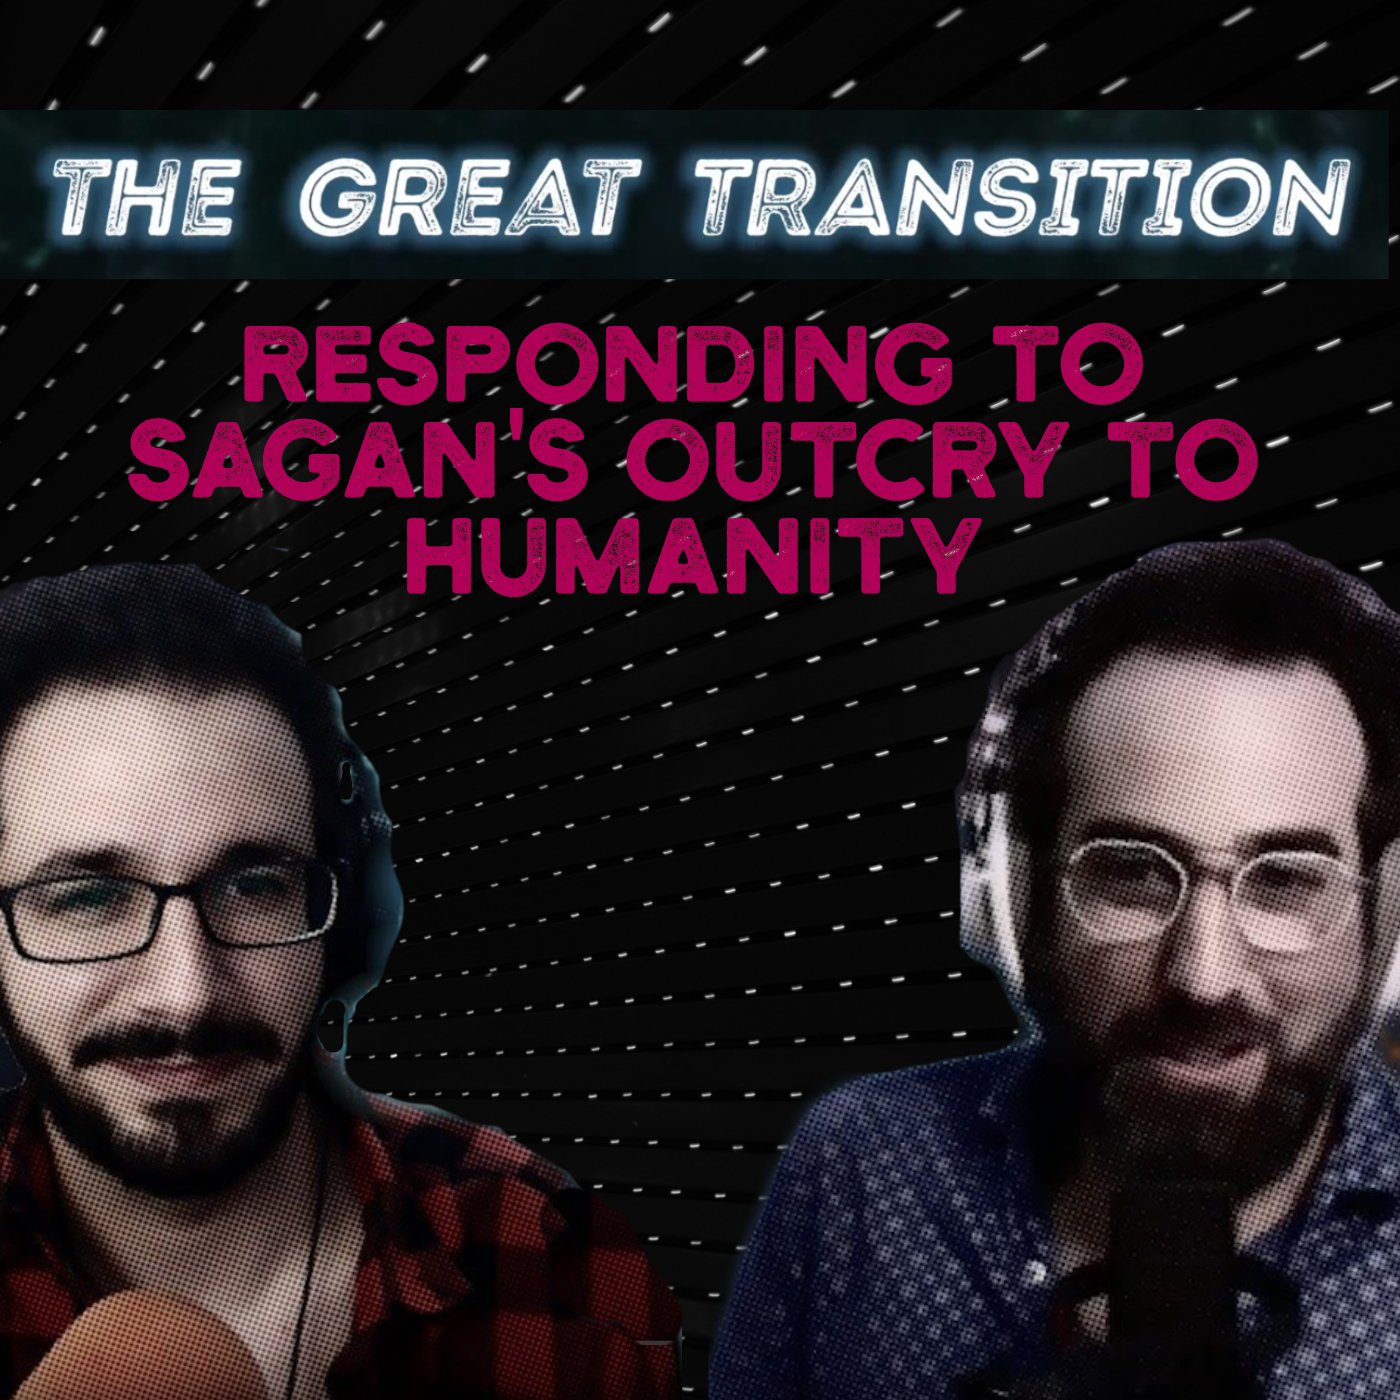 The Great Transition - Responding To Sagan’s Outcry To Humanity